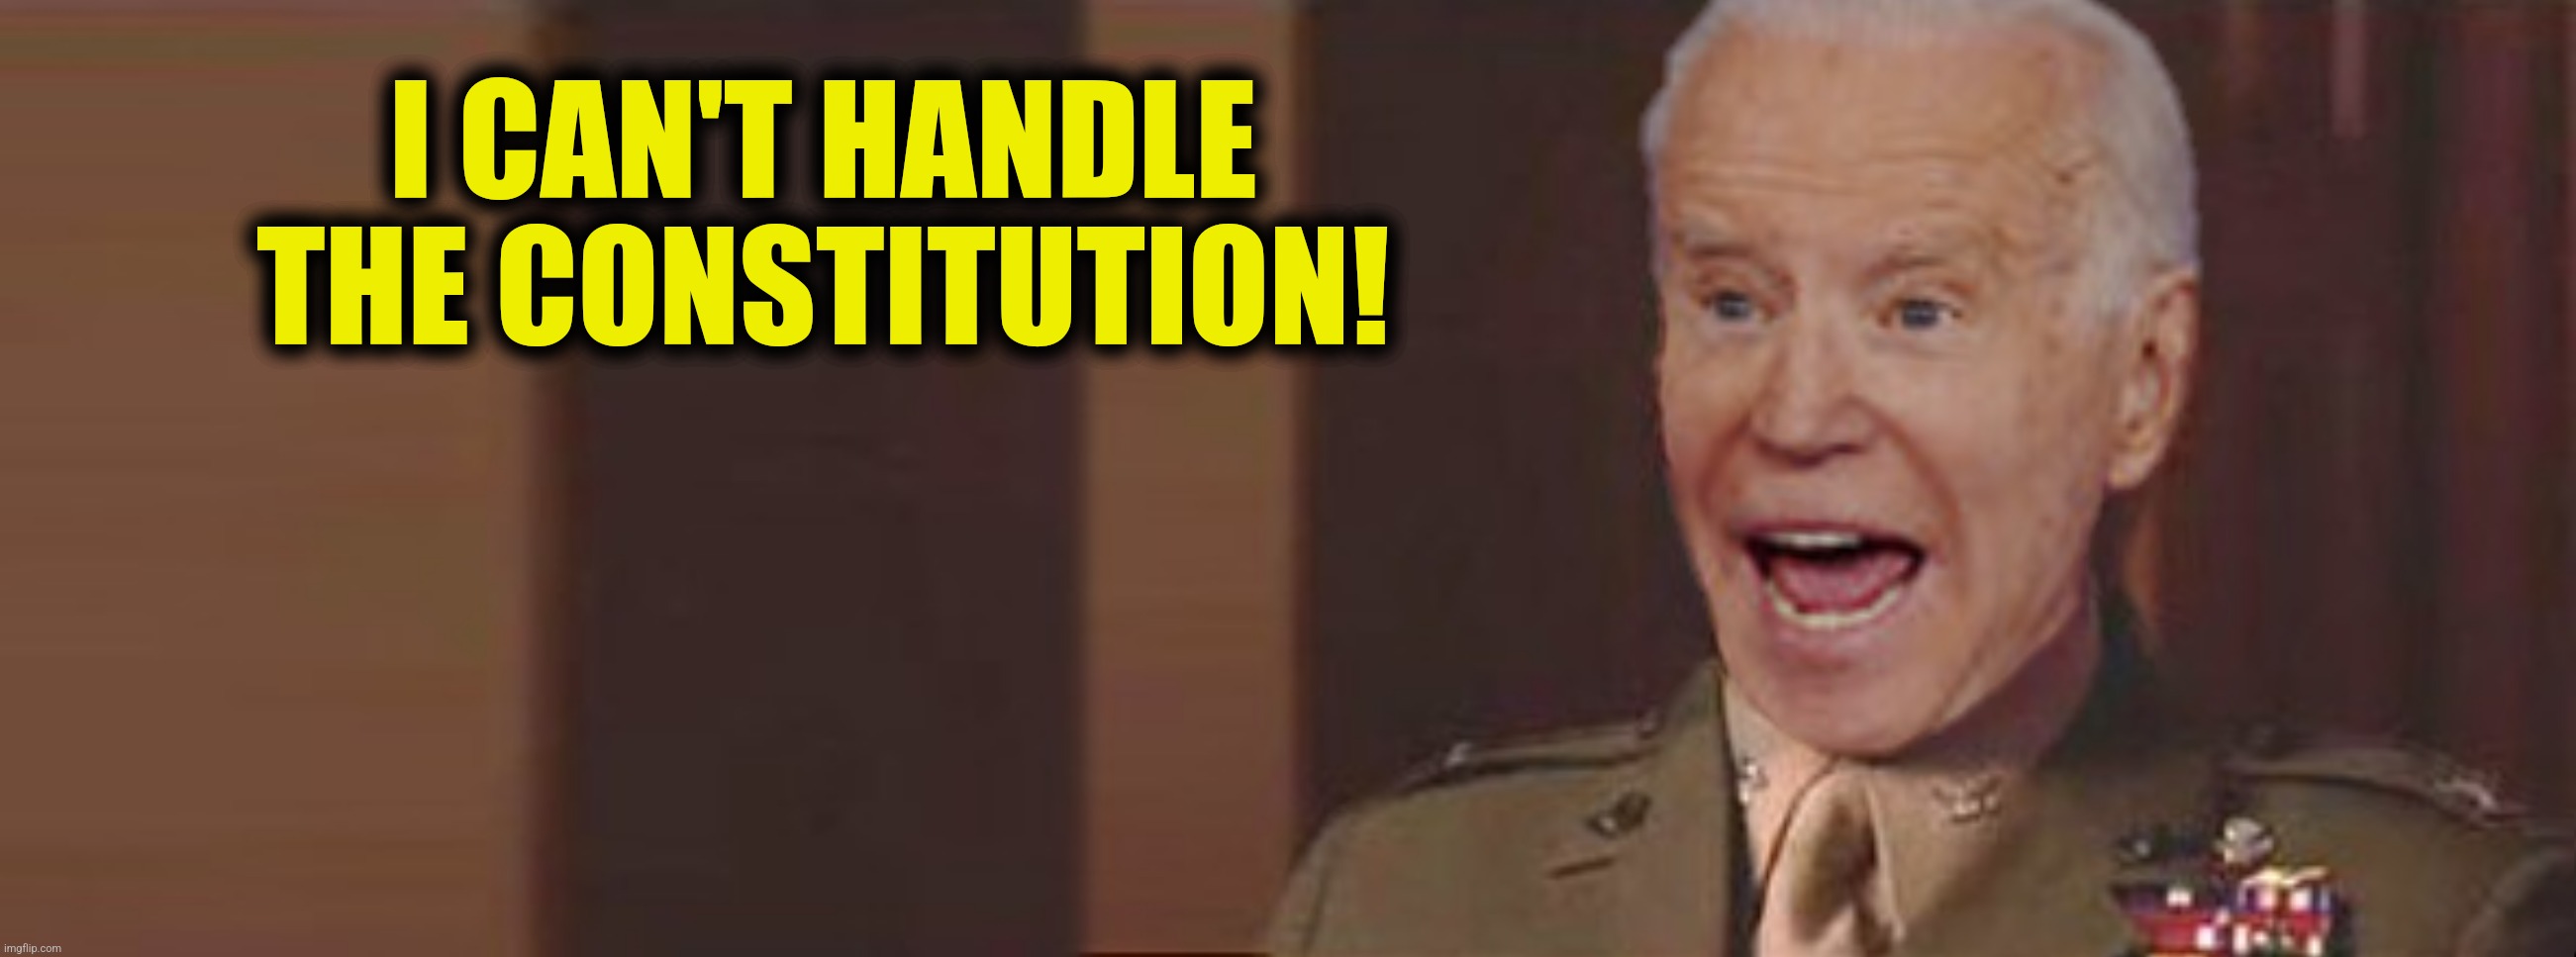 I CAN'T HANDLE THE CONSTITUTION! | made w/ Imgflip meme maker